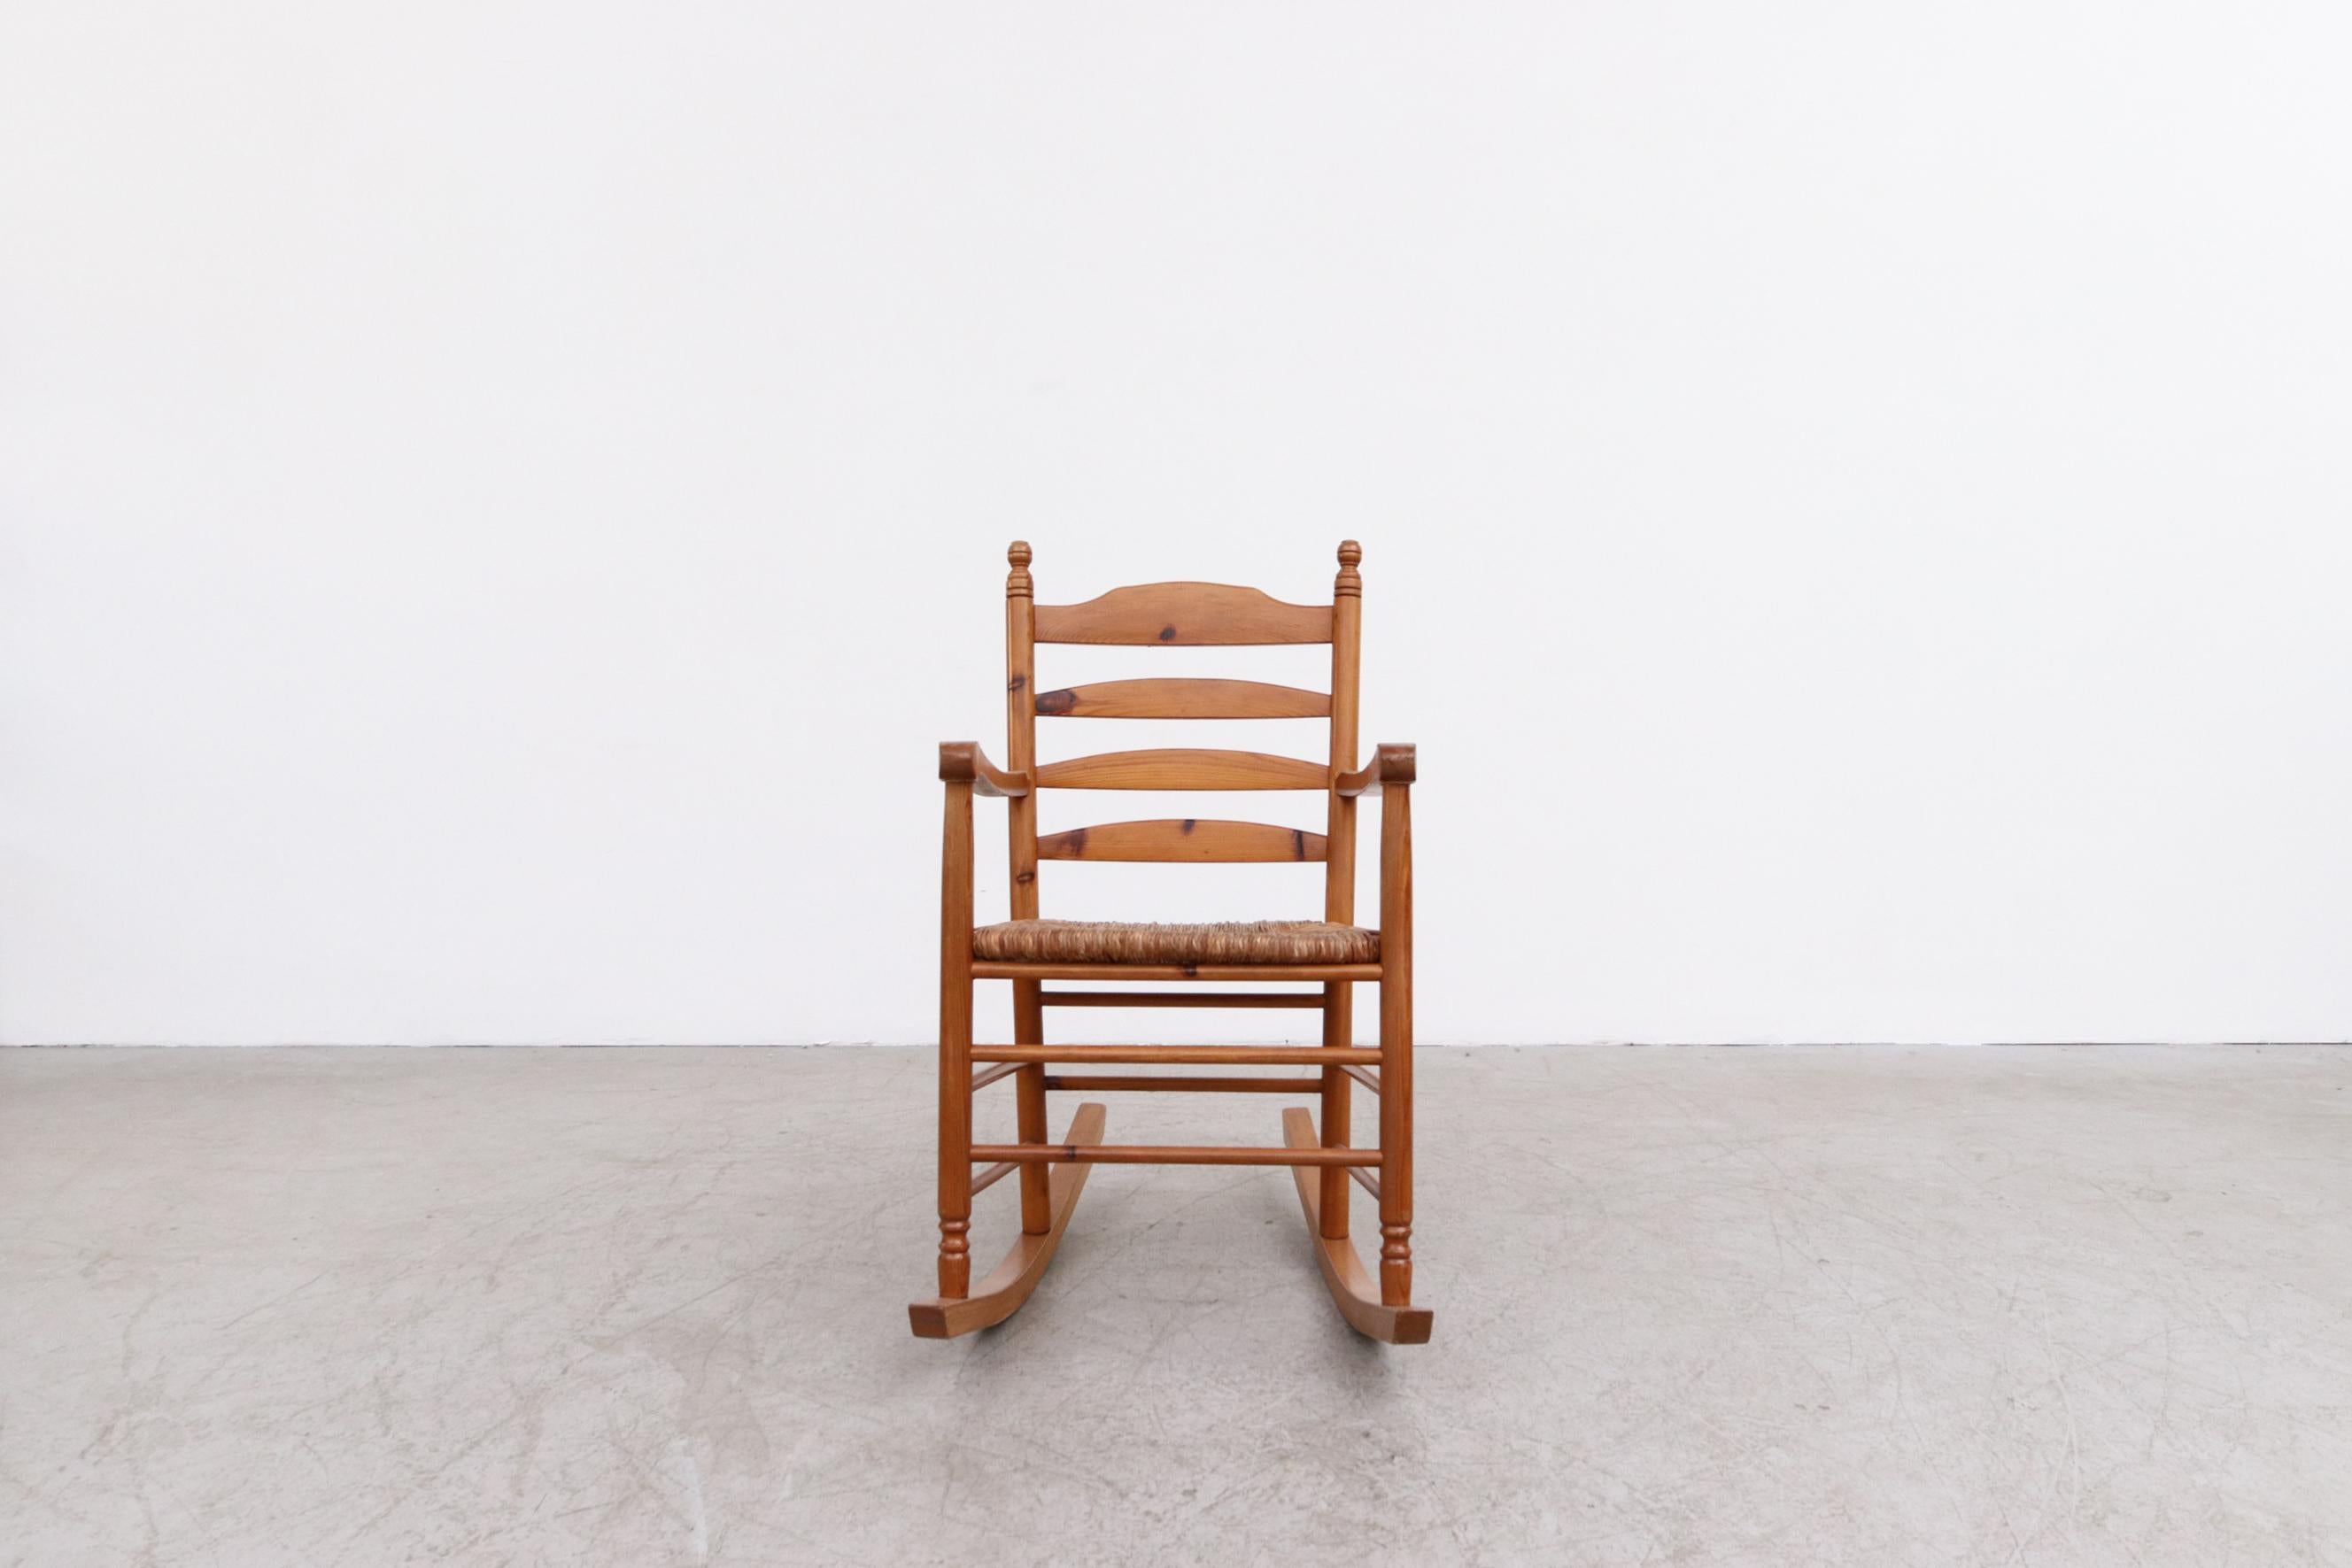 Danish mid-century pine and rush rocking chair inspired by Charlotte Perriand, Les Arc series. In good original condition with nice patina and visible wear. Condition is consistent with its age and use.